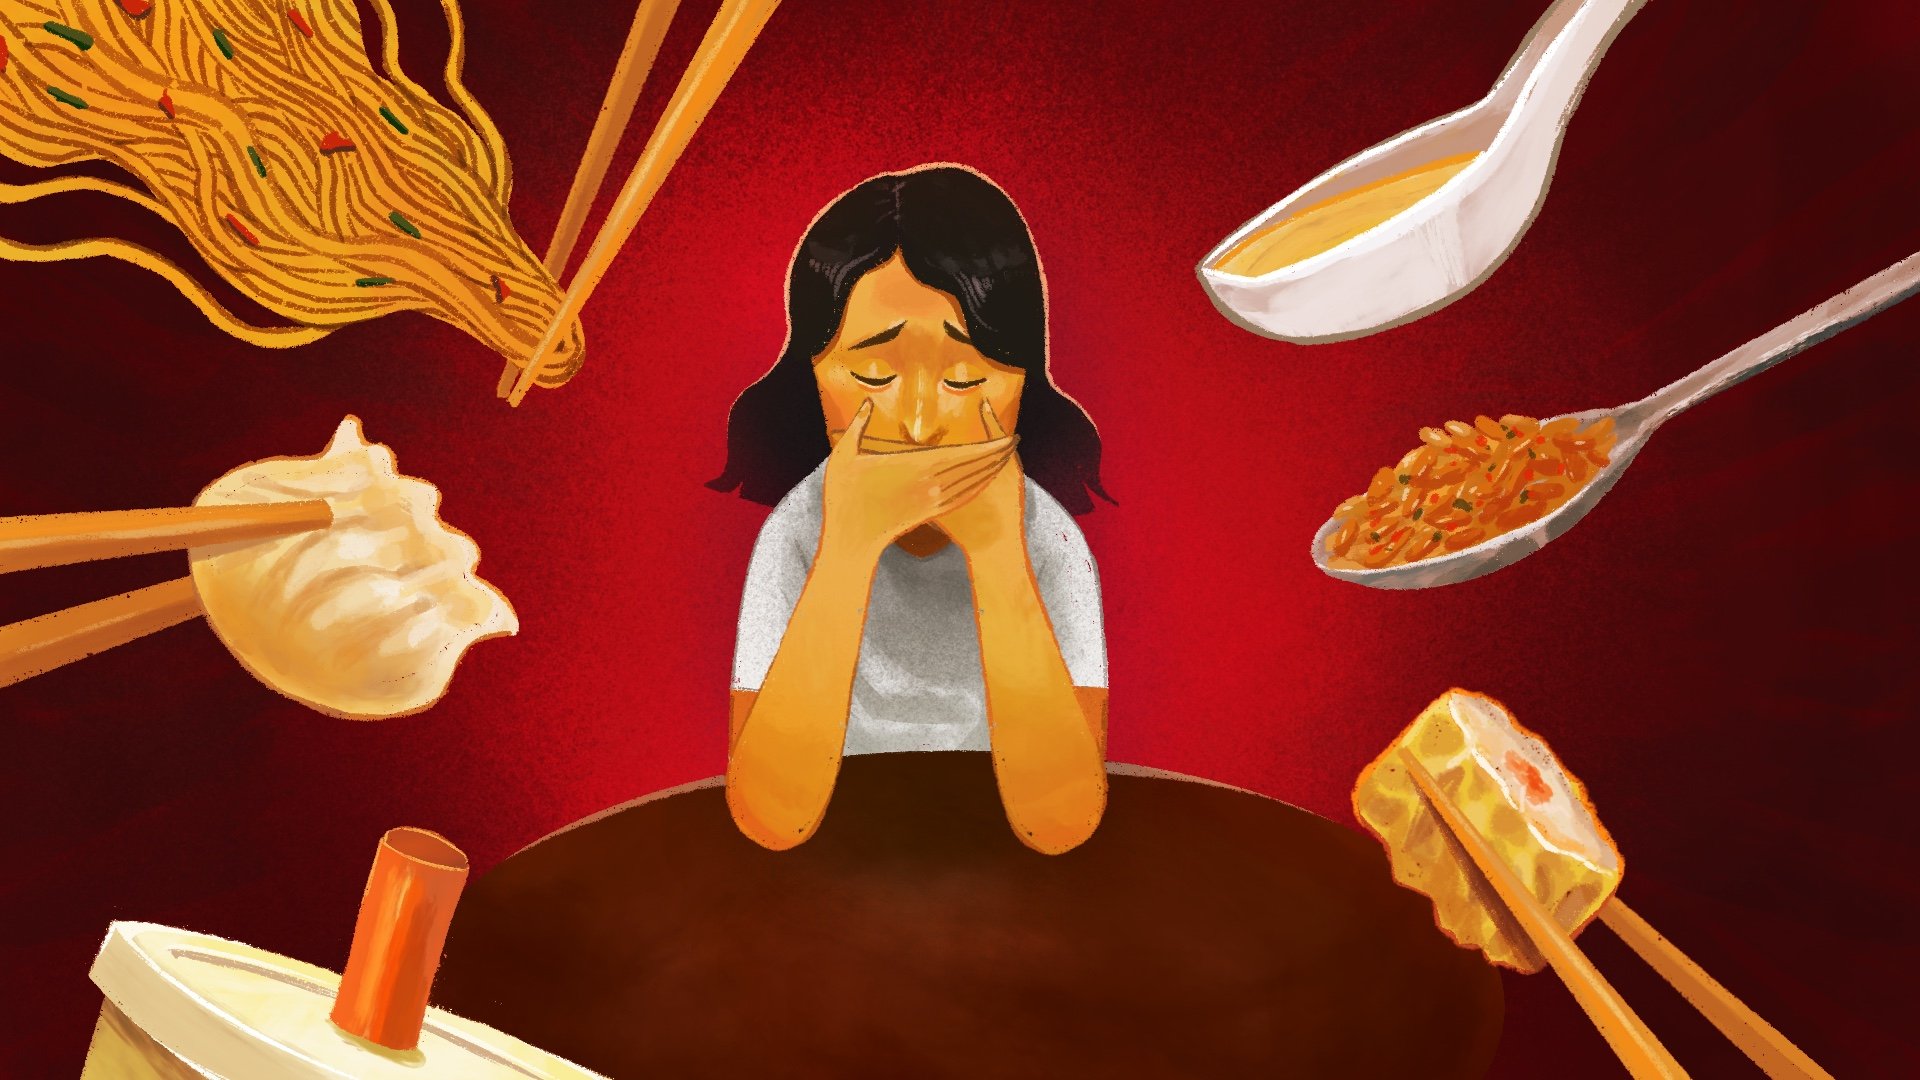 Illustration showing young woman covering her mouth whilst spoons and chopsticks enter the frame looking like she doesn't want to be fed.